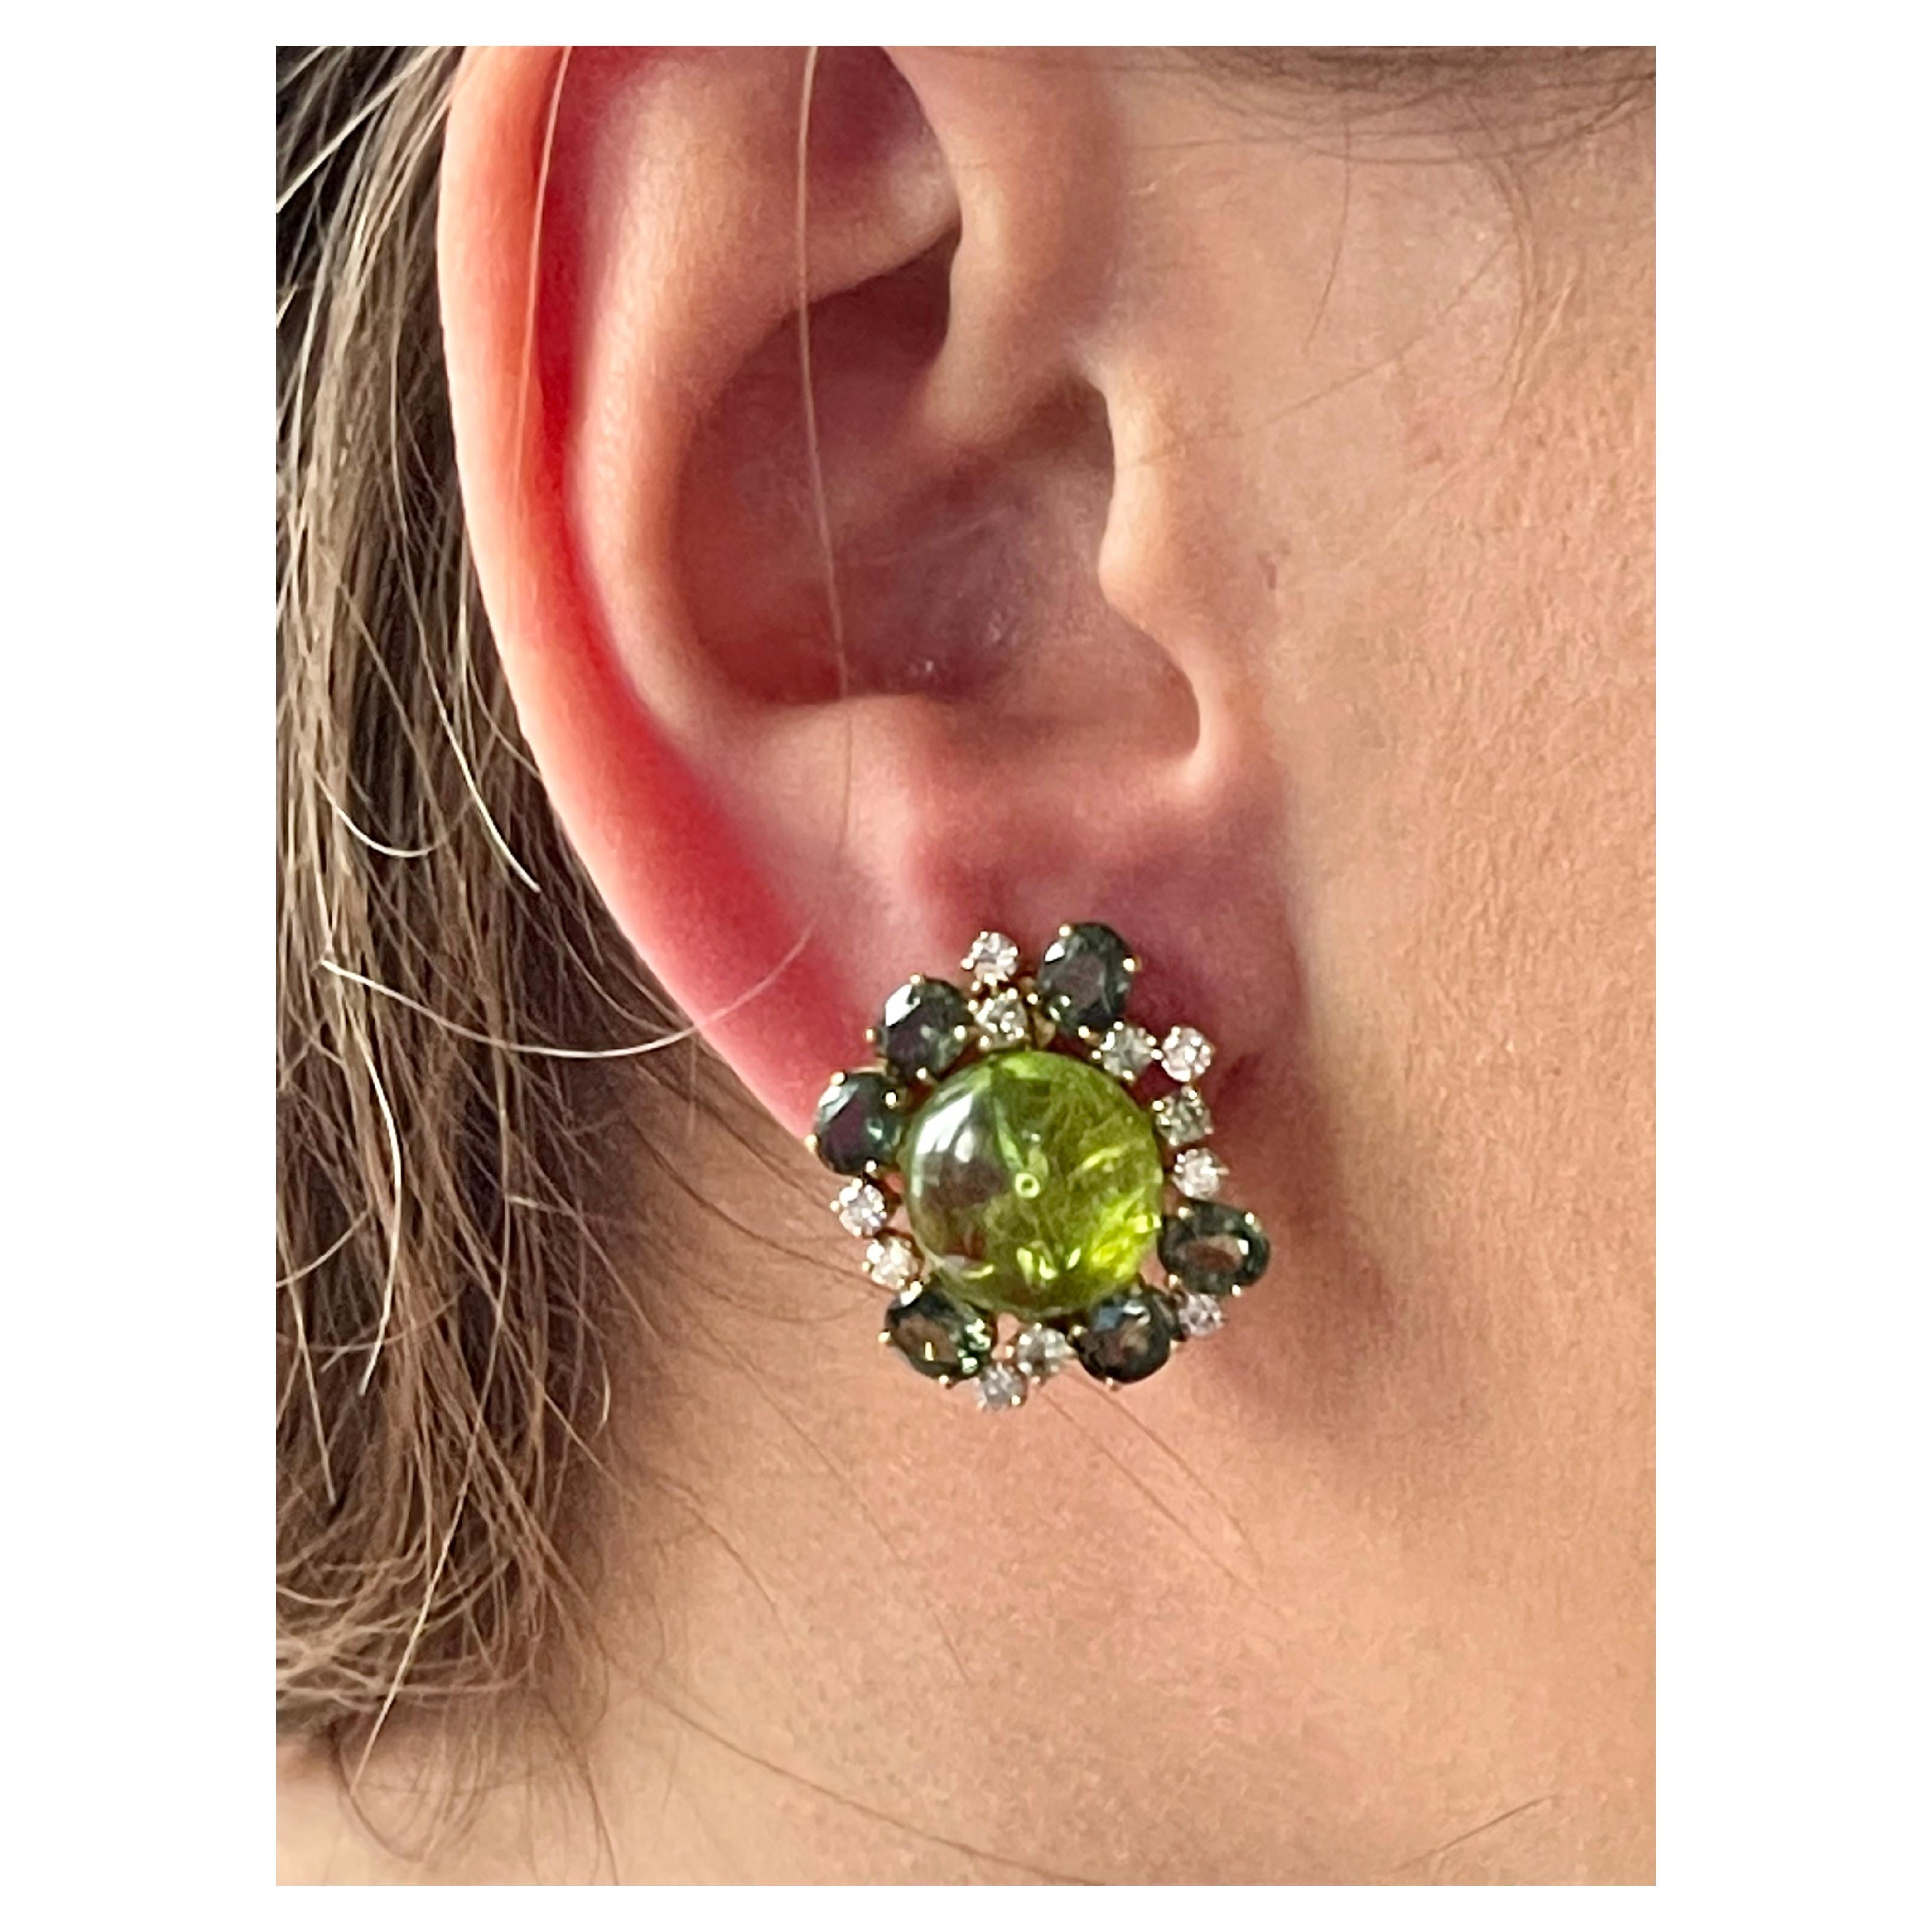 Exquisite clip-on cluster earrings crafted in 18 K yellow Gold feautring 2 Peridots Cabochons weighing 17.05 ct, 12 green Sapphires weighing 5.97 ct and Diamonds with a total weight of 
0.70 ct. The earclips can be worn on pierced ears and also on